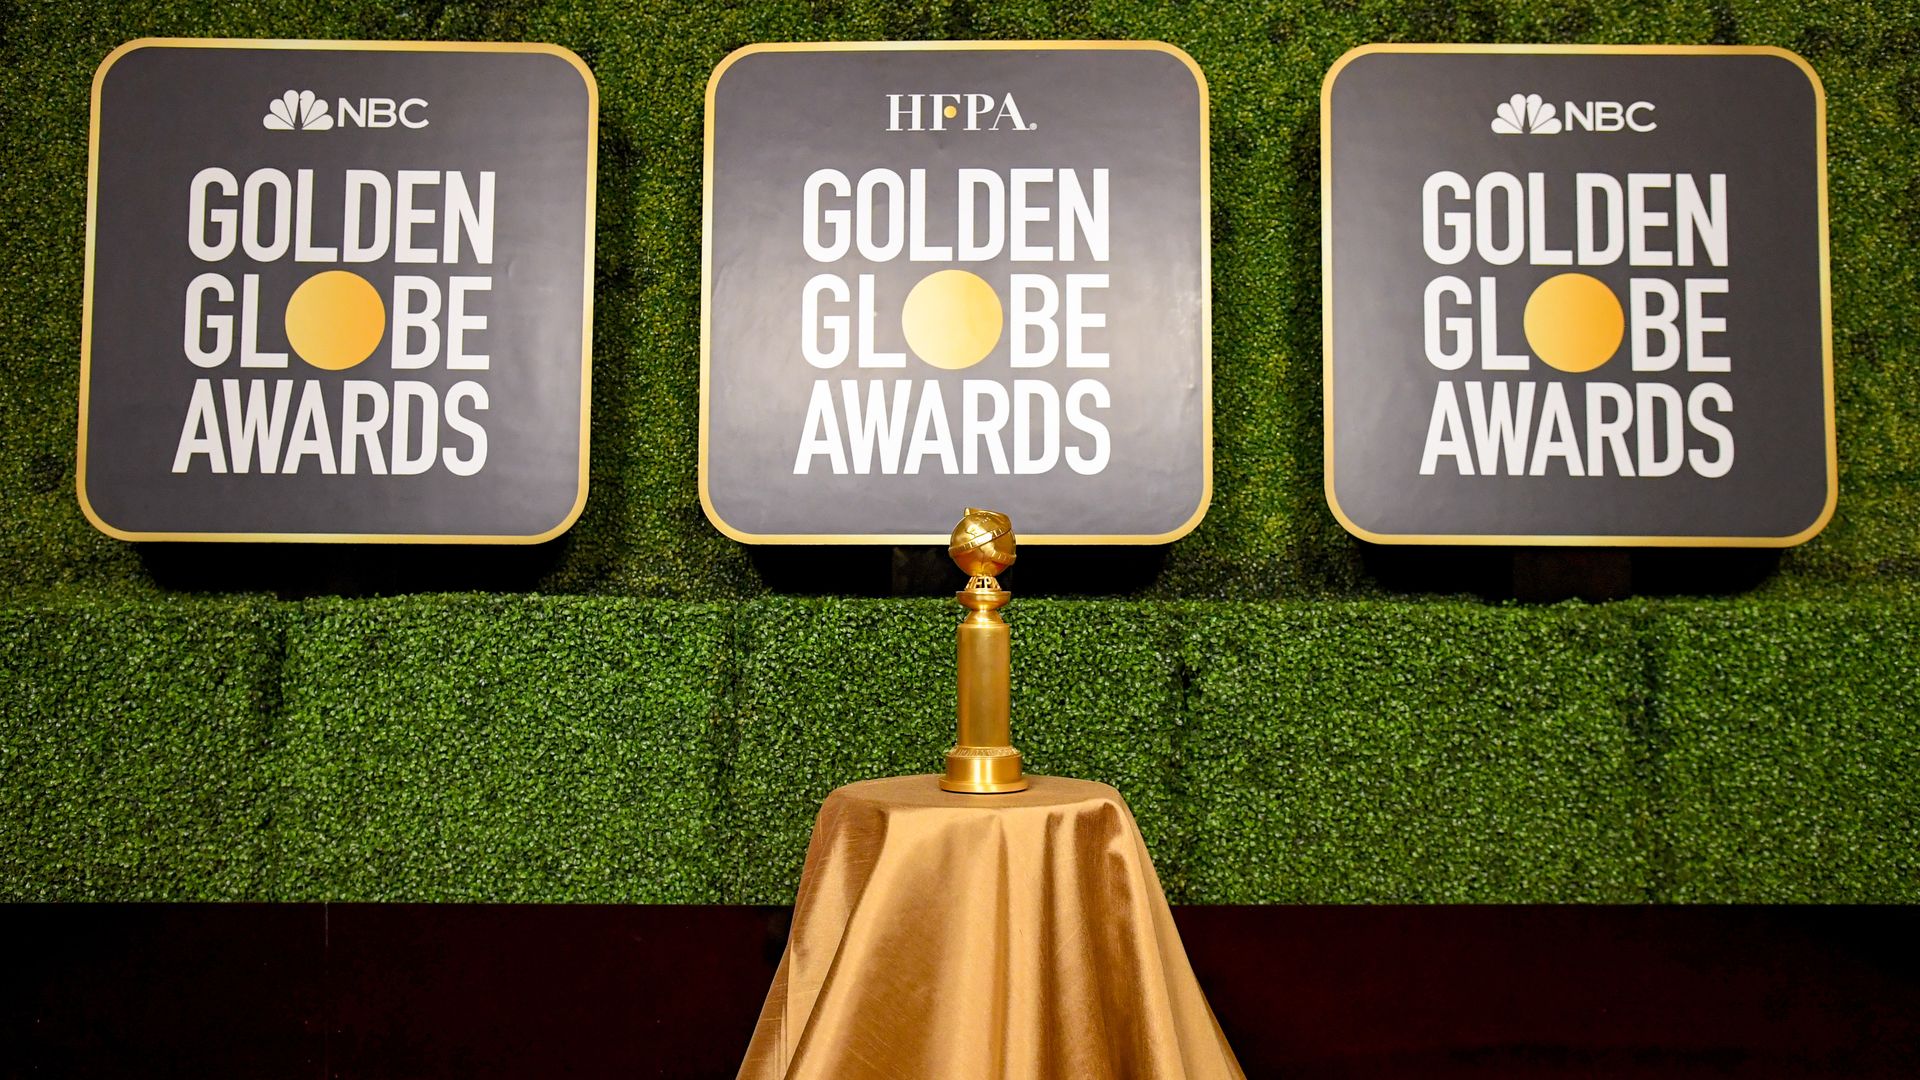 A Golden Globes statue sits in front of signs announcing the Golden Globe Awards